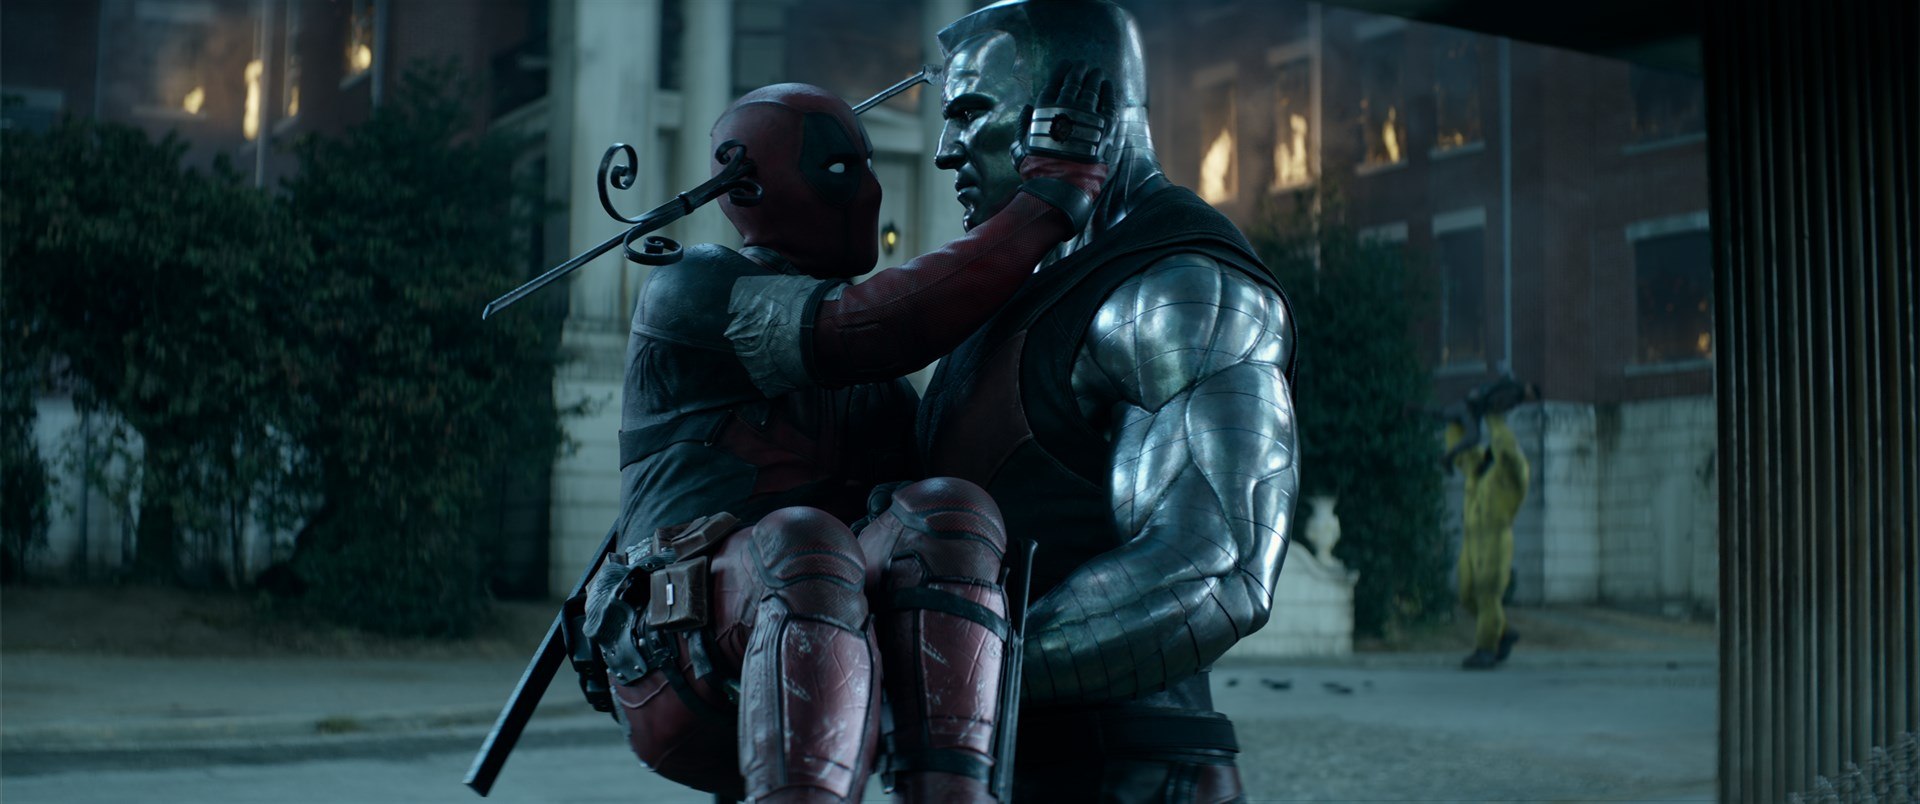 Framestore Delivers A Slice Of The Action For Deadpool 2